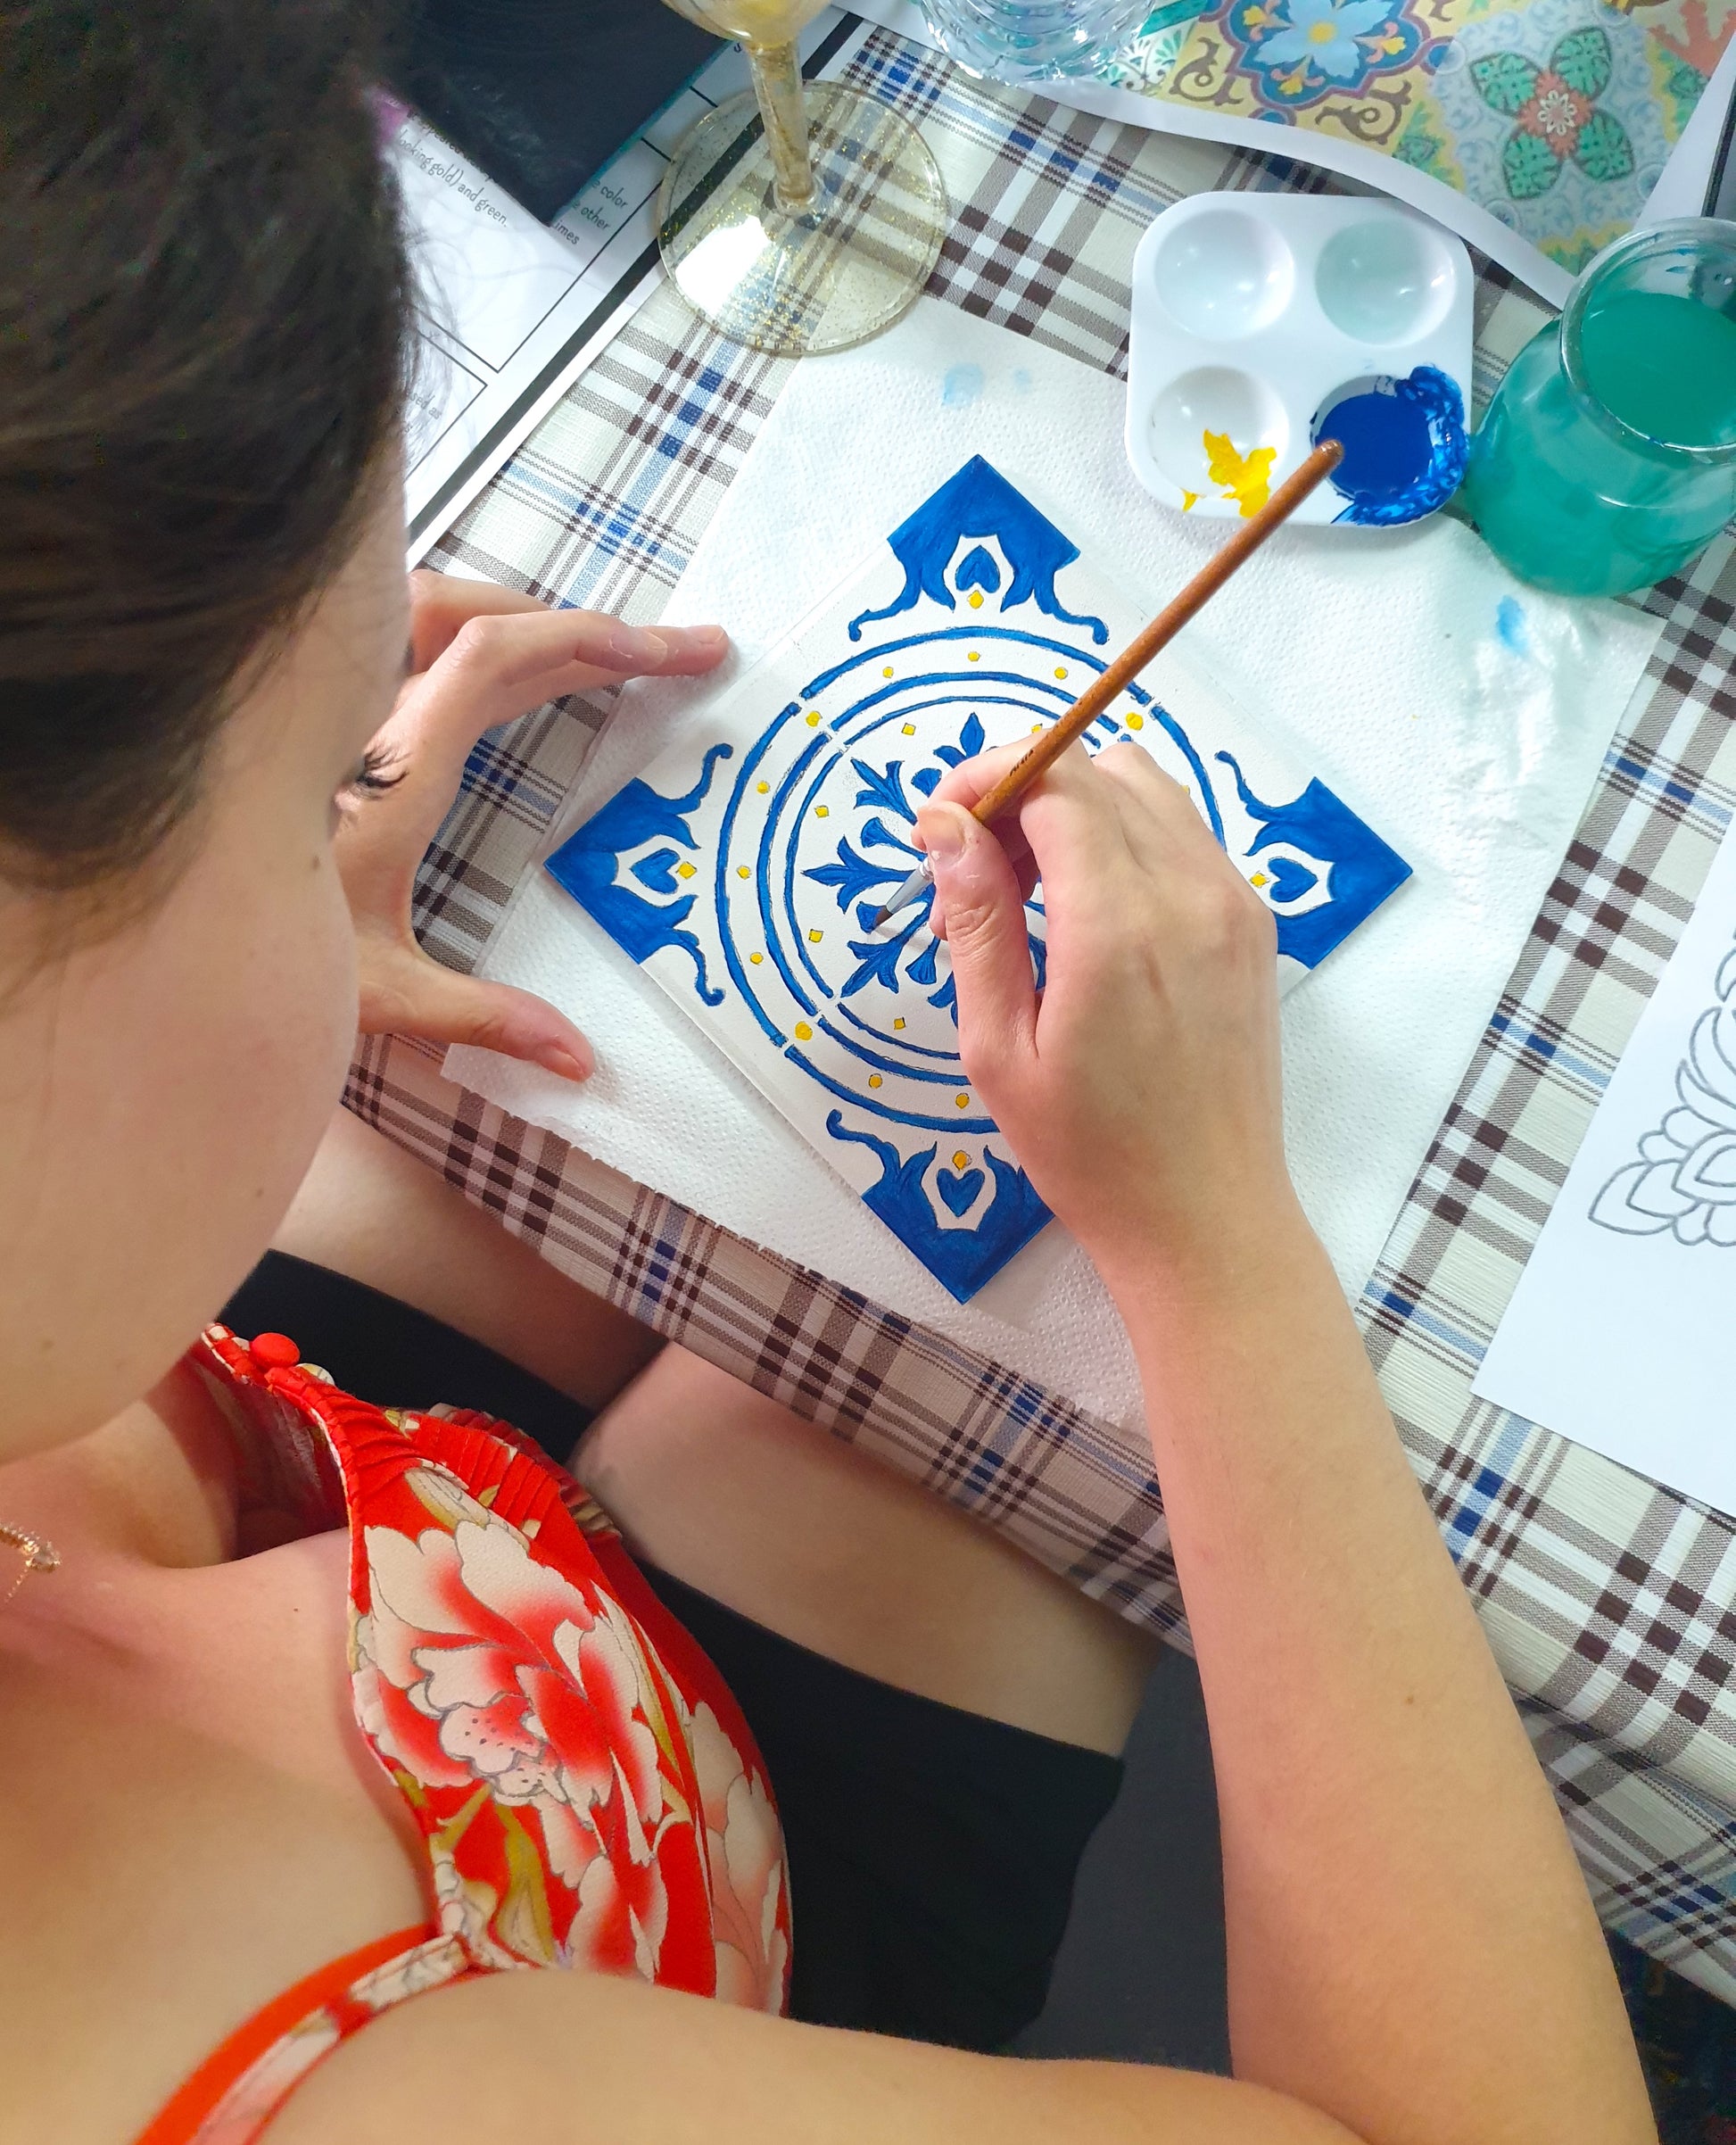 Tile Painting Workshop with Daniela in Porto, Portugal by subcultours